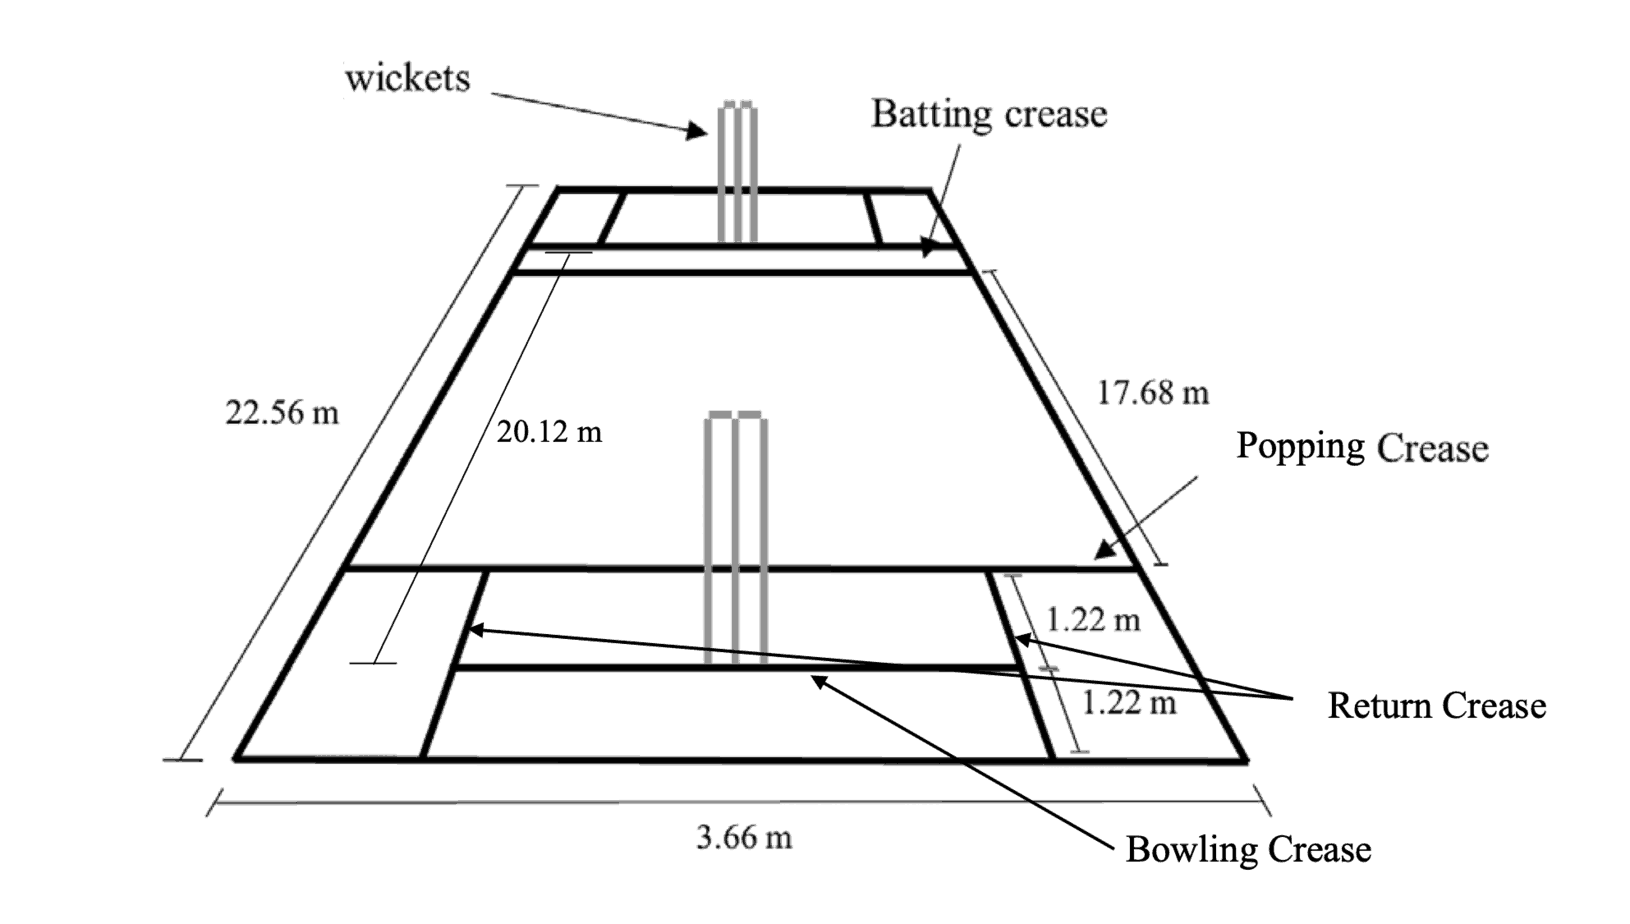 cricket plans for 4 lines